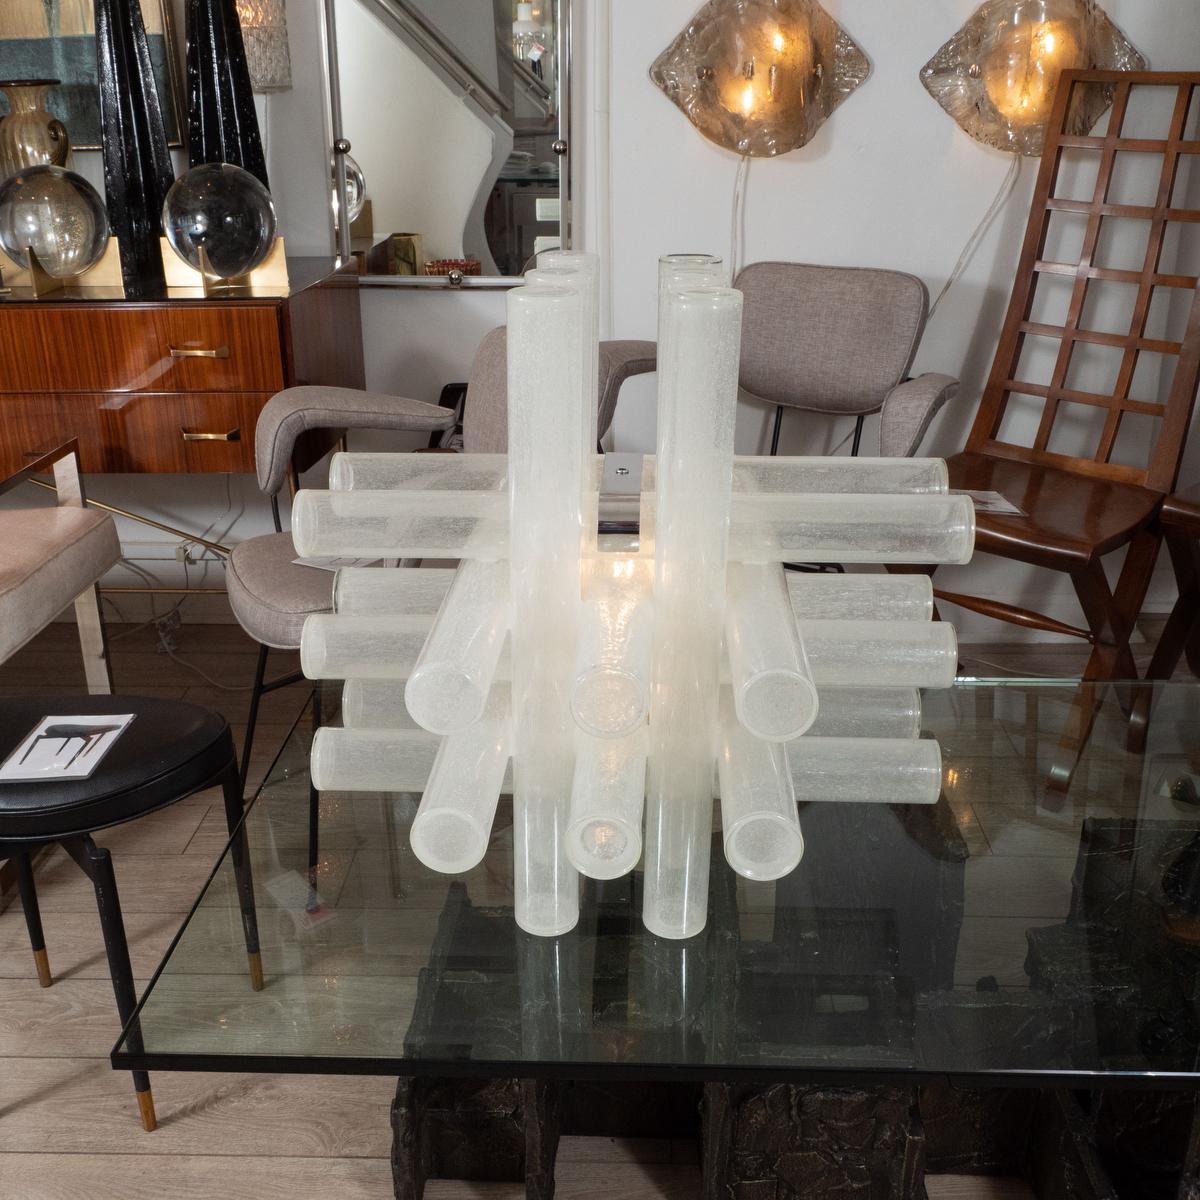 Rare cubic table lamp composed of Murano glass tubes with inclusive air bubbles by Mazzega.